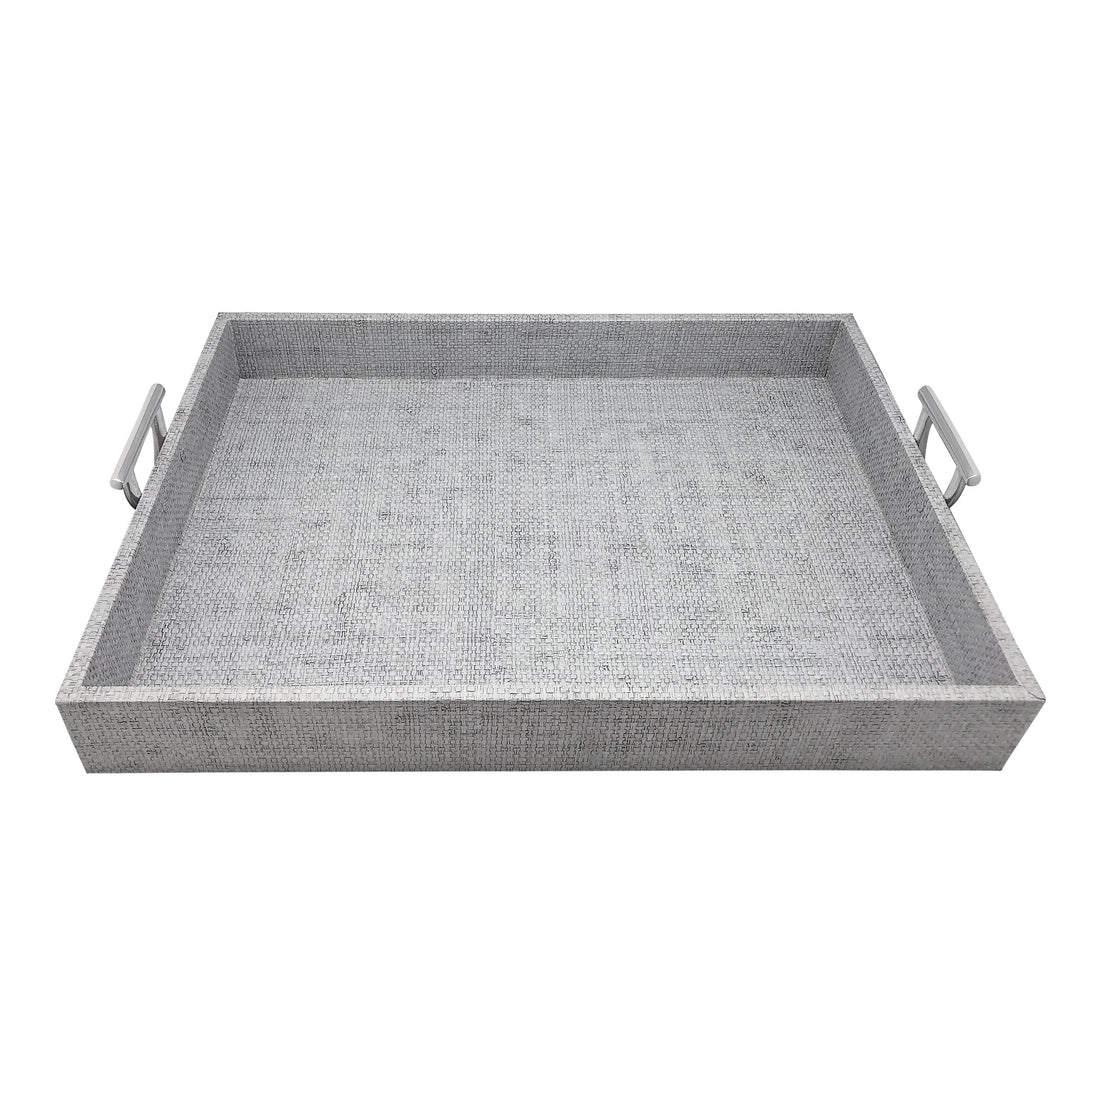 Pale Gray Faux Grass Cloth Tray with Metal Handles-Serving Trays and More | Mariposa